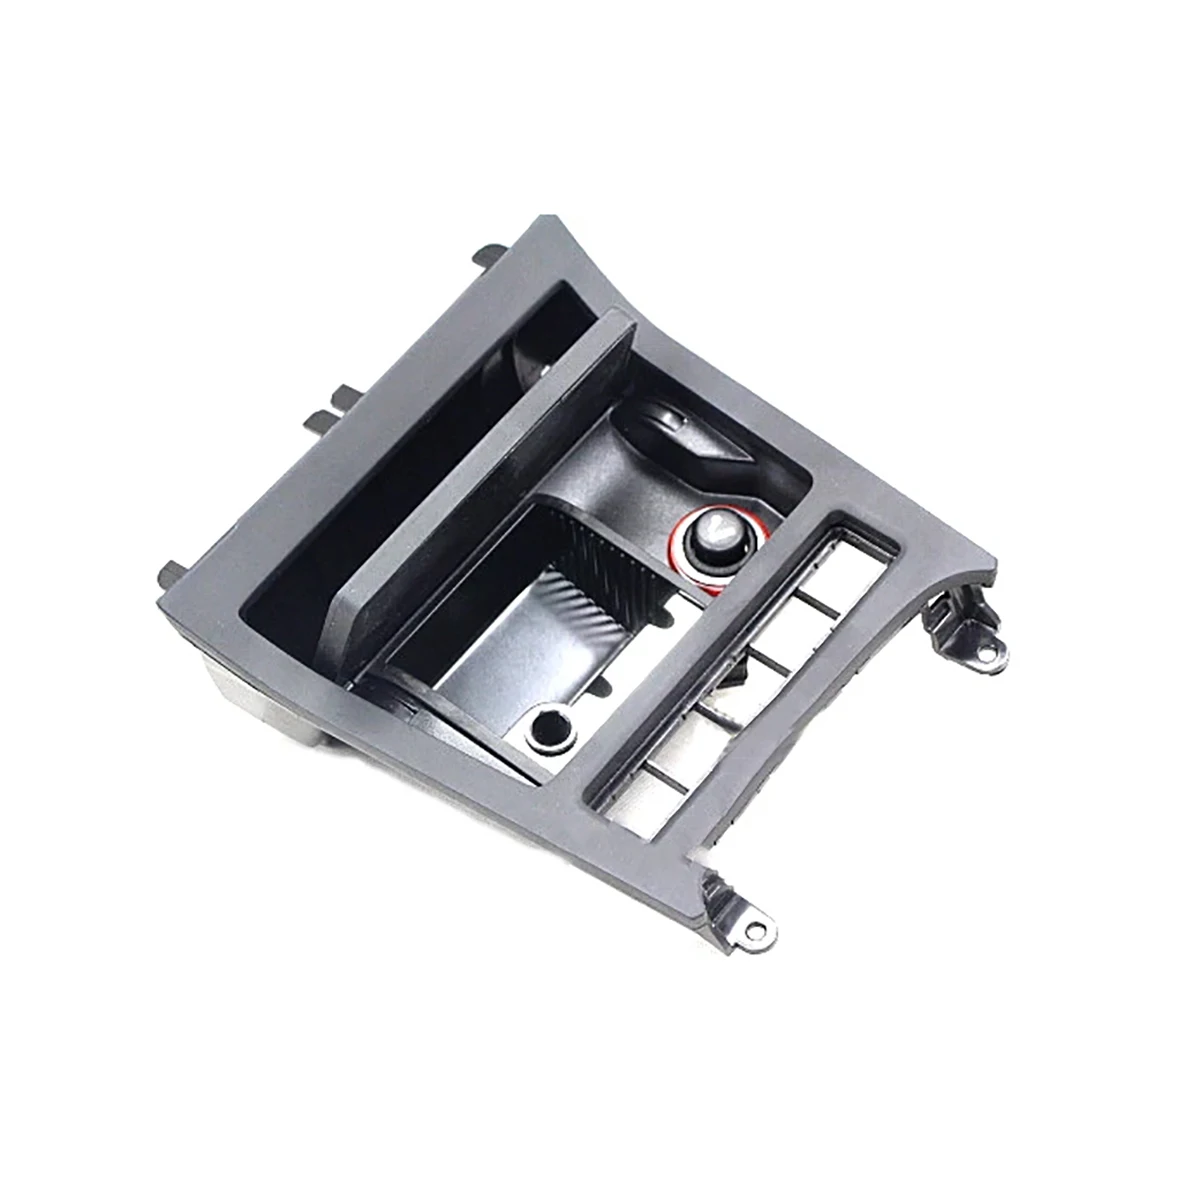 PDC ESP Button Ashtray assembly Front Panel FOR VW GOLF 6 MK6